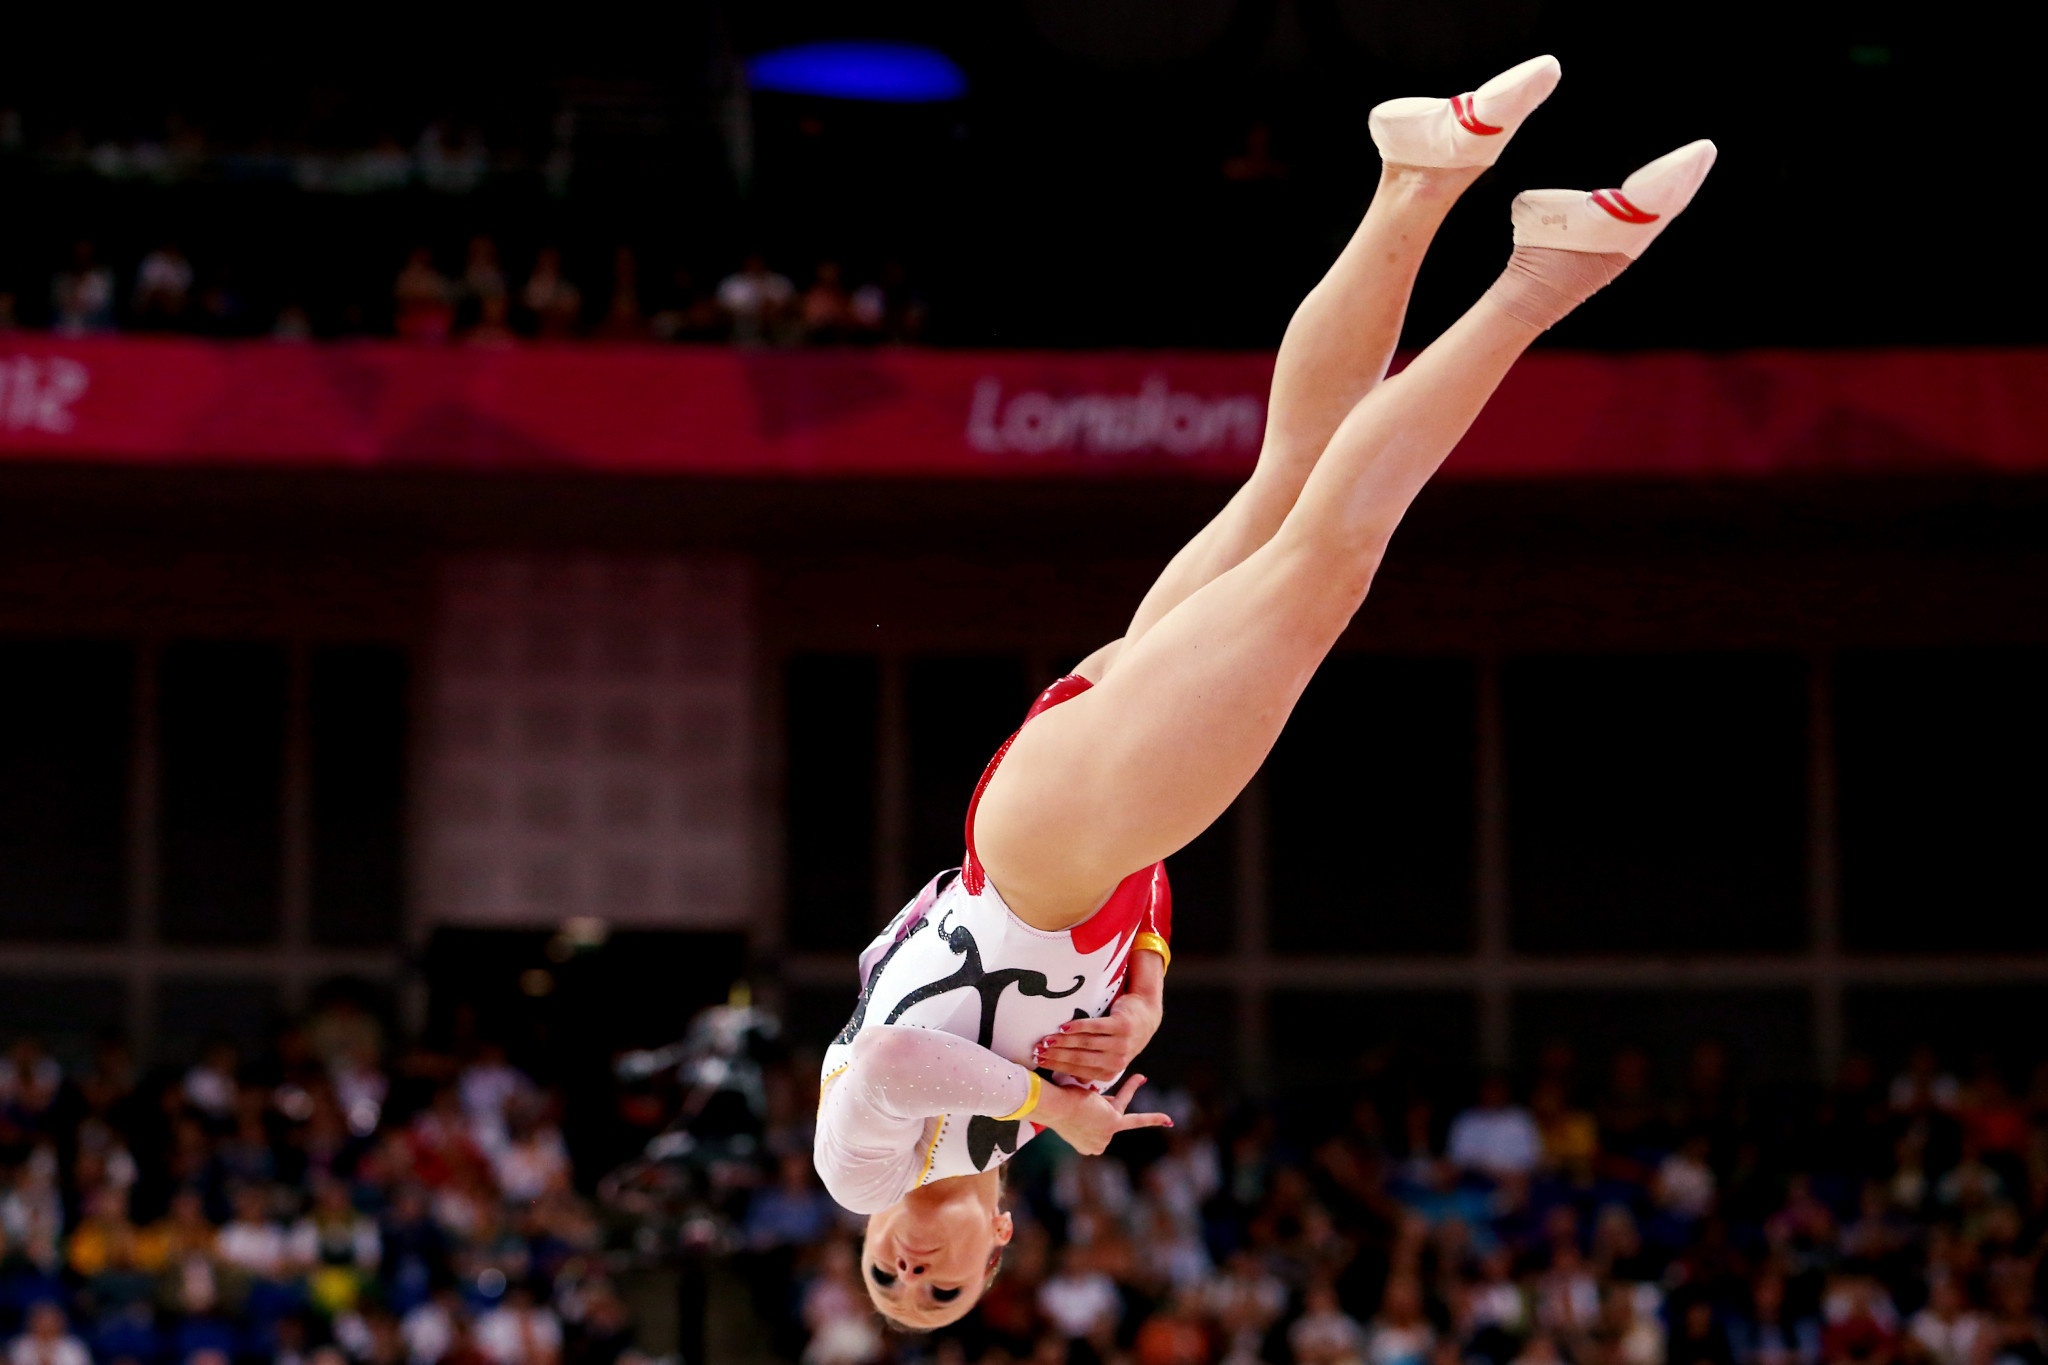 Tokyo 2020 qualification process continues with FIG World Cup in Cottbus